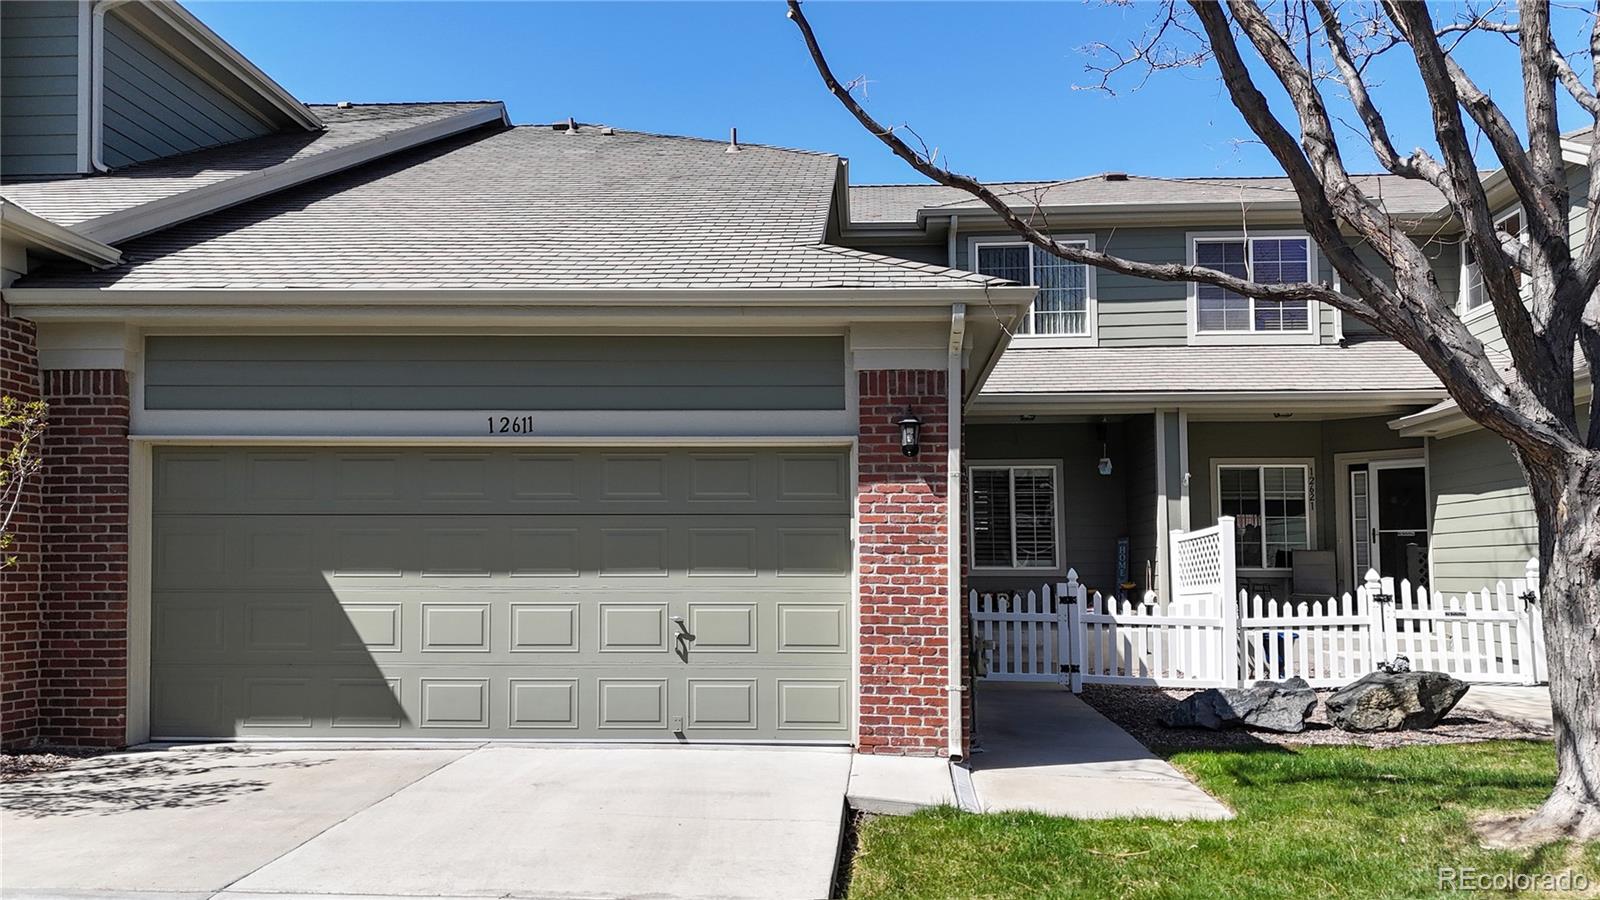 12611  King Point, broomfield MLS: 2402874 Beds: 3 Baths: 4 Price: $569,900